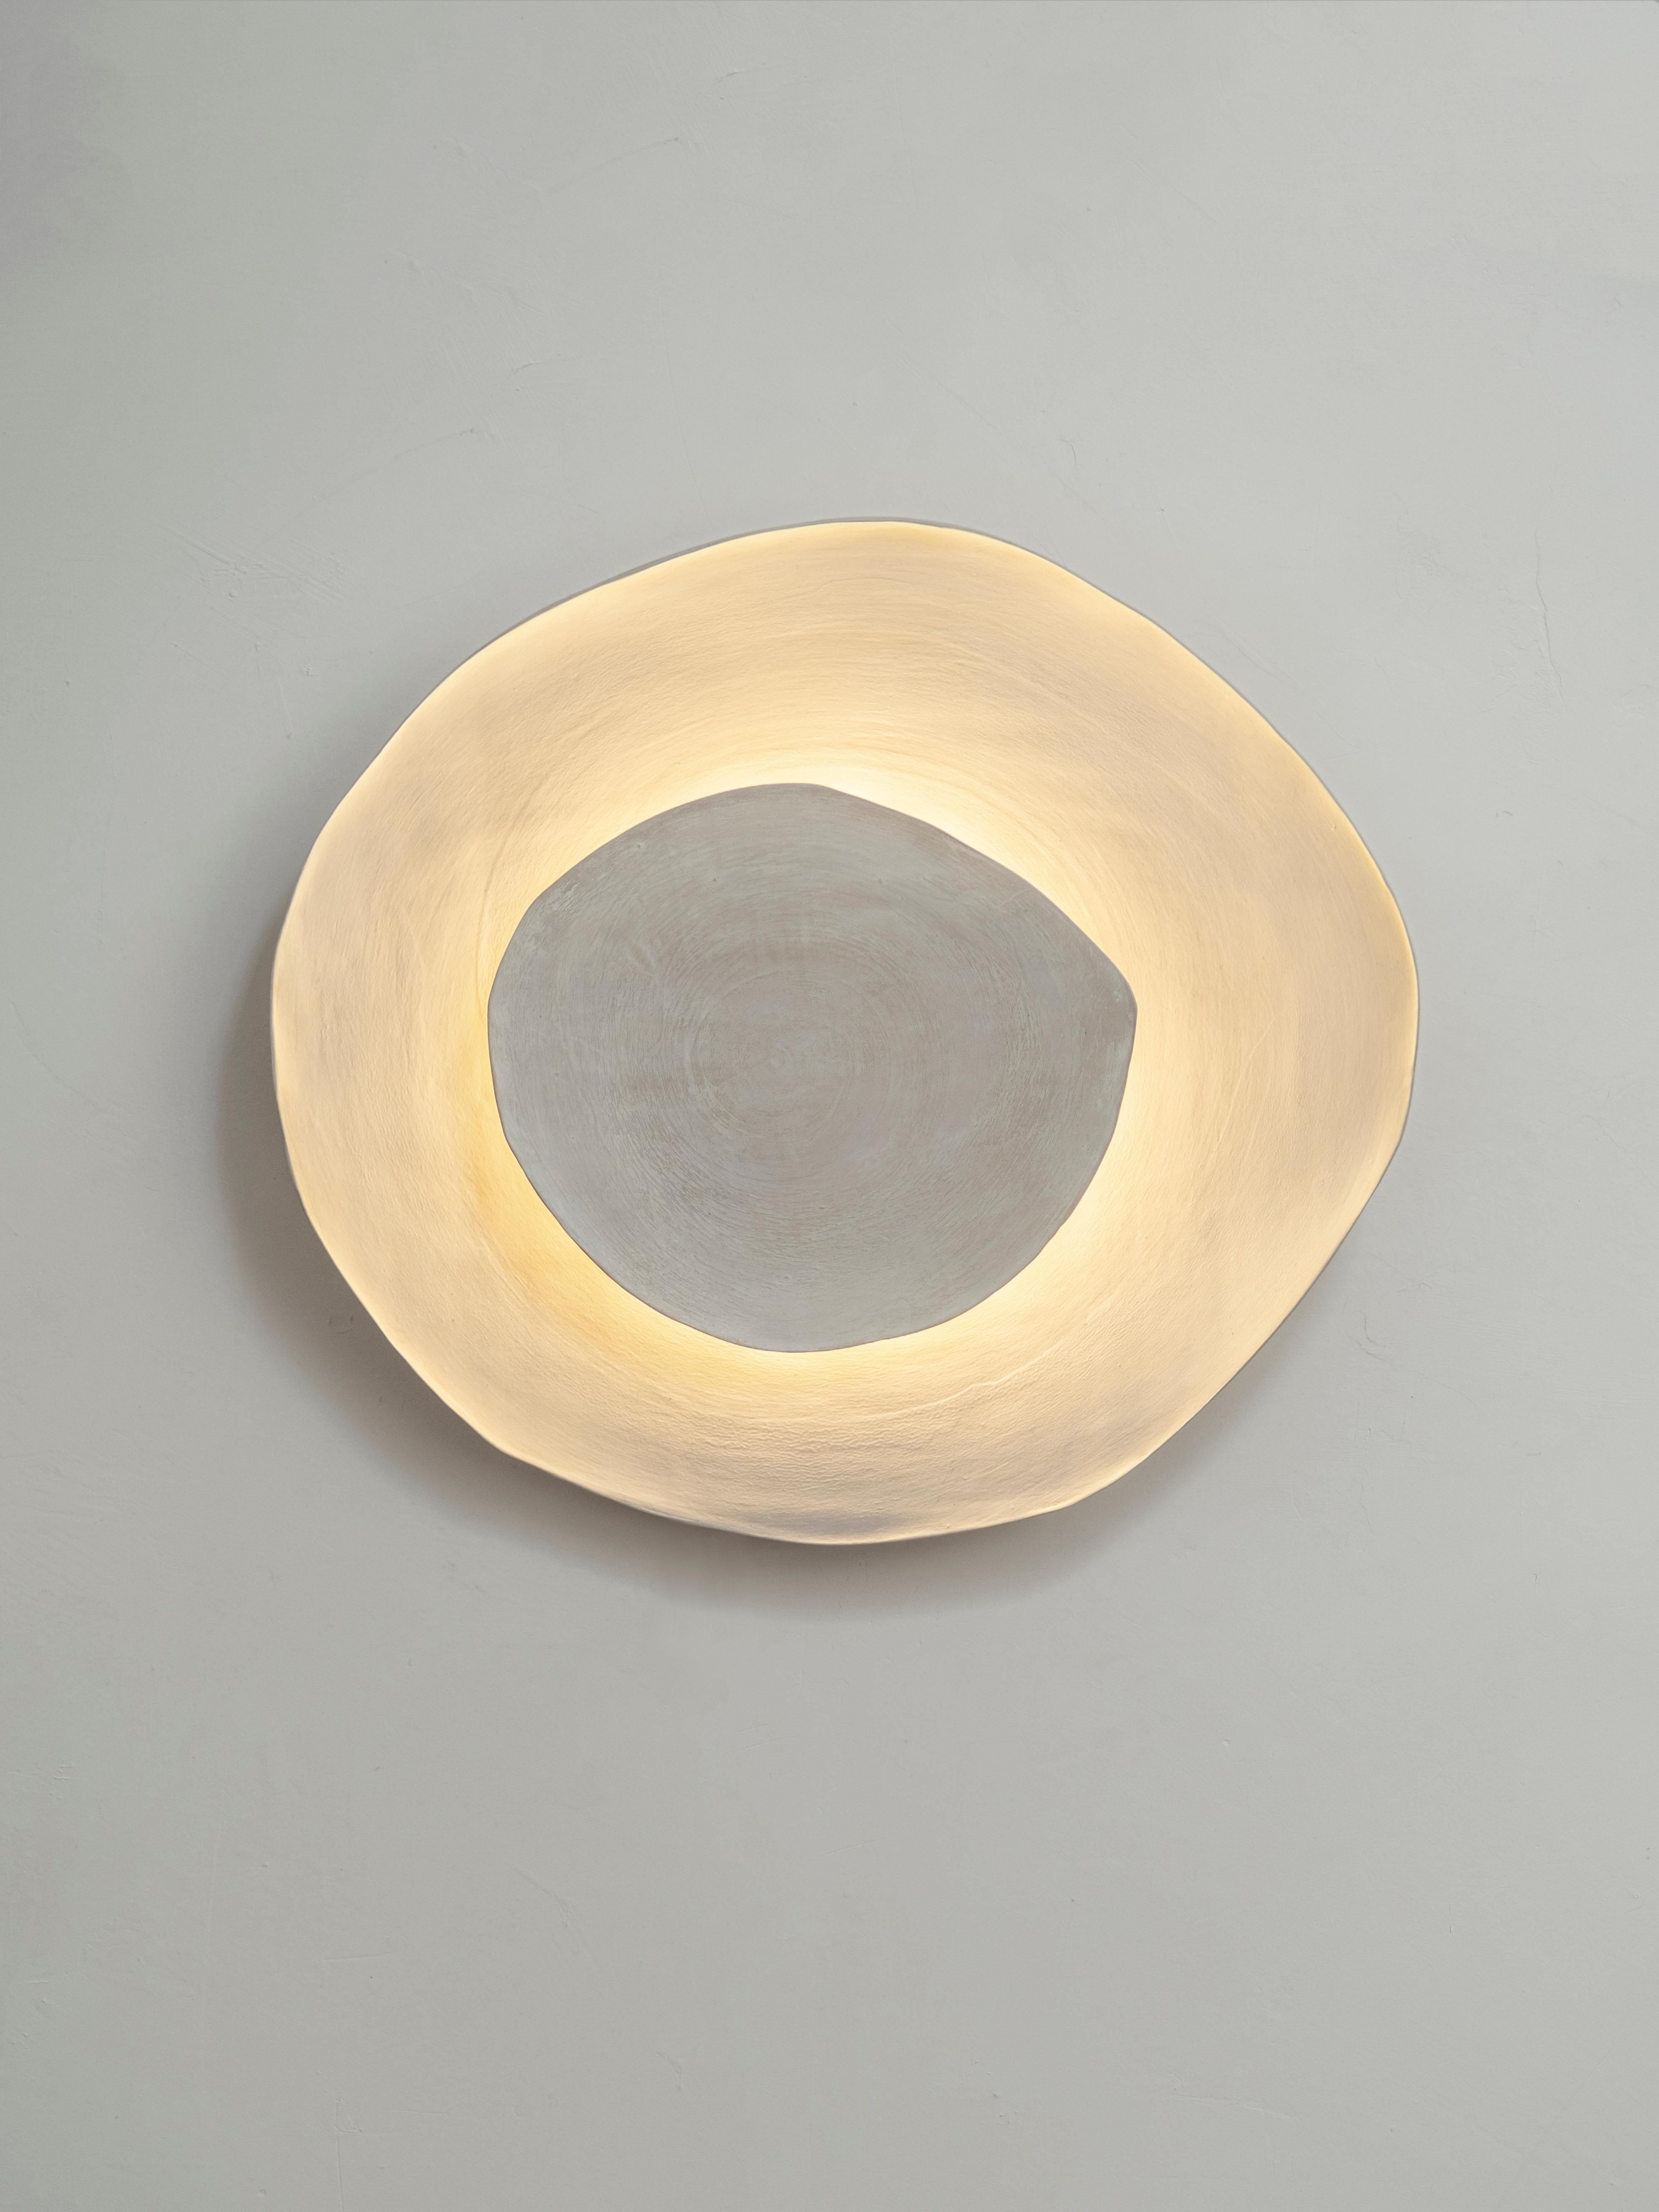 Silk #10 wall light by Margaux Leycuras.
One of a kind, signed and numbered
Dimensions: Ø40 x H 43 cm 
Material: Ceramic, sandy stoneware platters with a porcelain slip finish.
The piece is signed, numbered and delivered with a certificate of